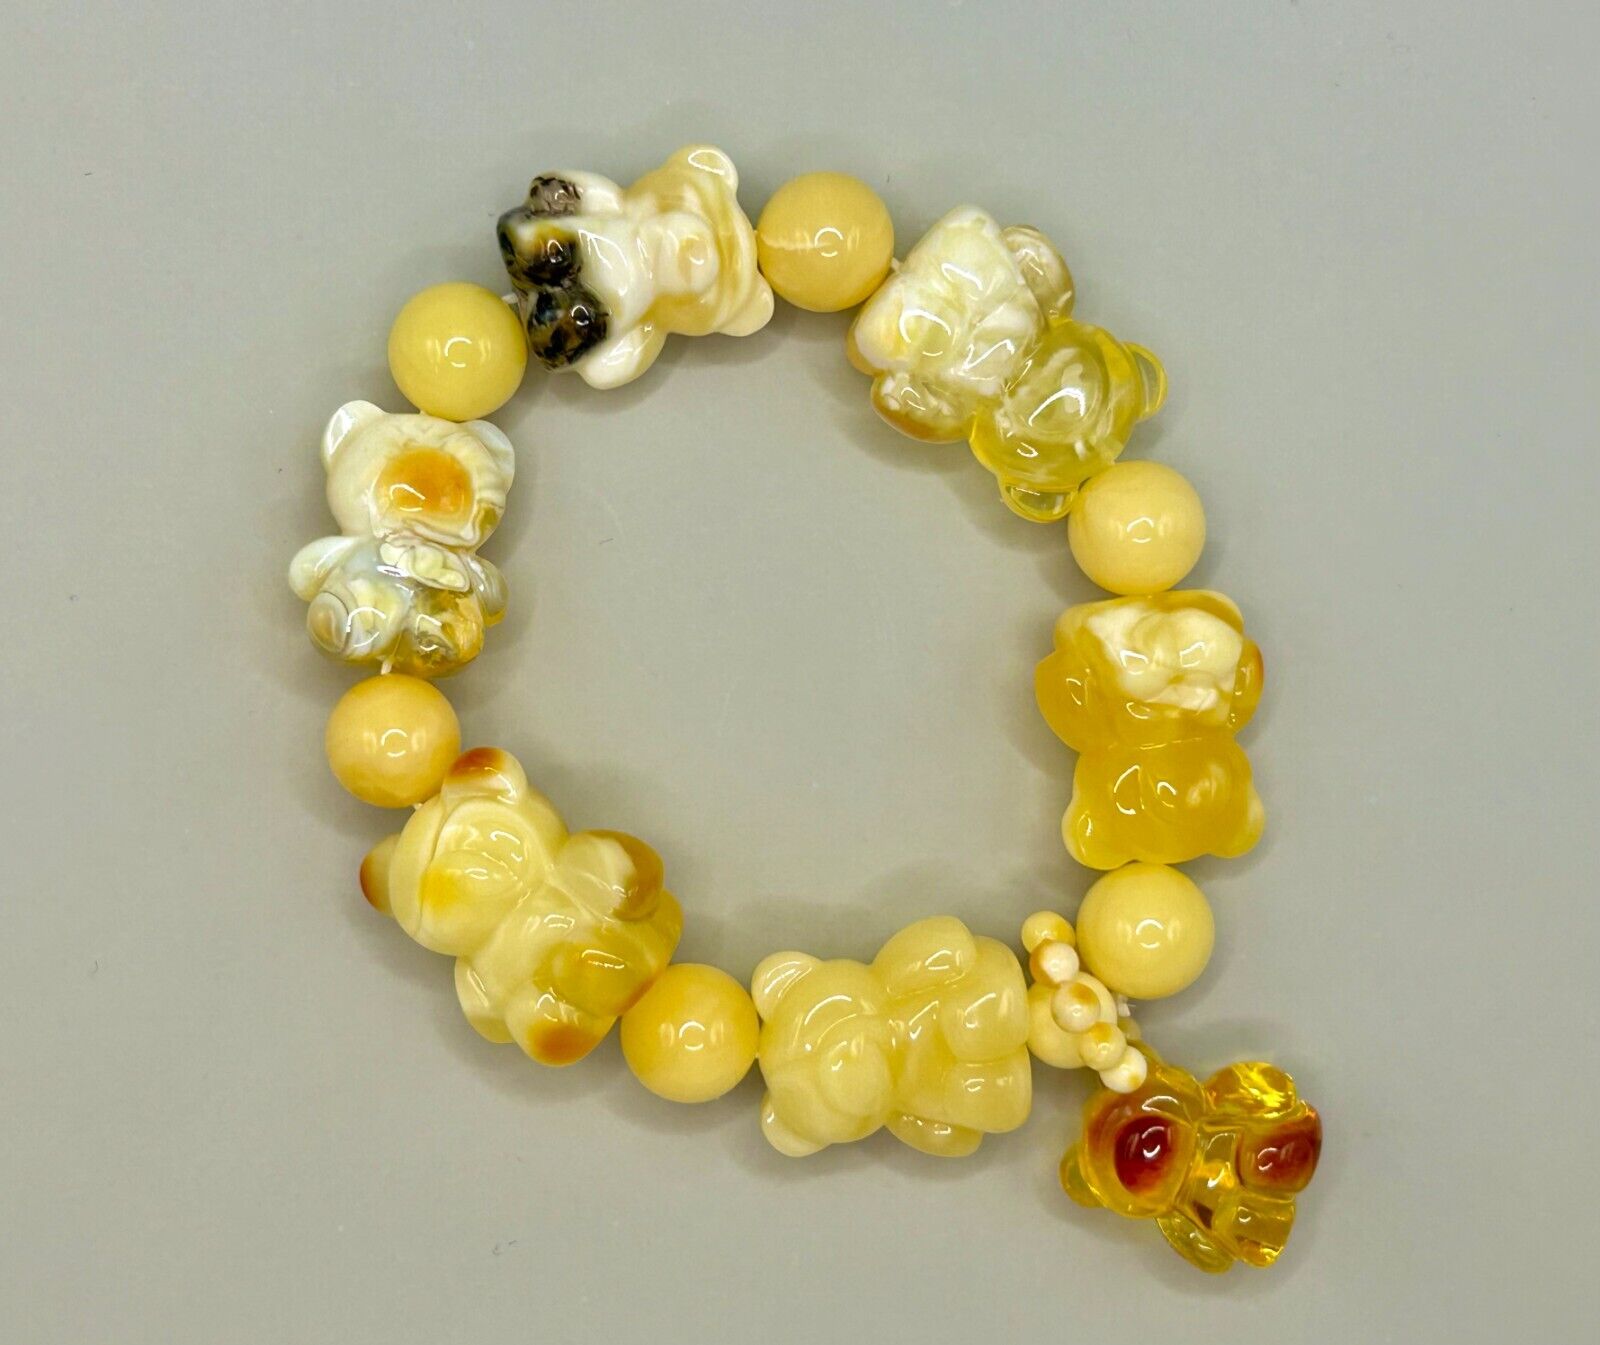 6 Cute Bears with 11mm beads Genuine Natural Beeswax Amber Women's Bracelet